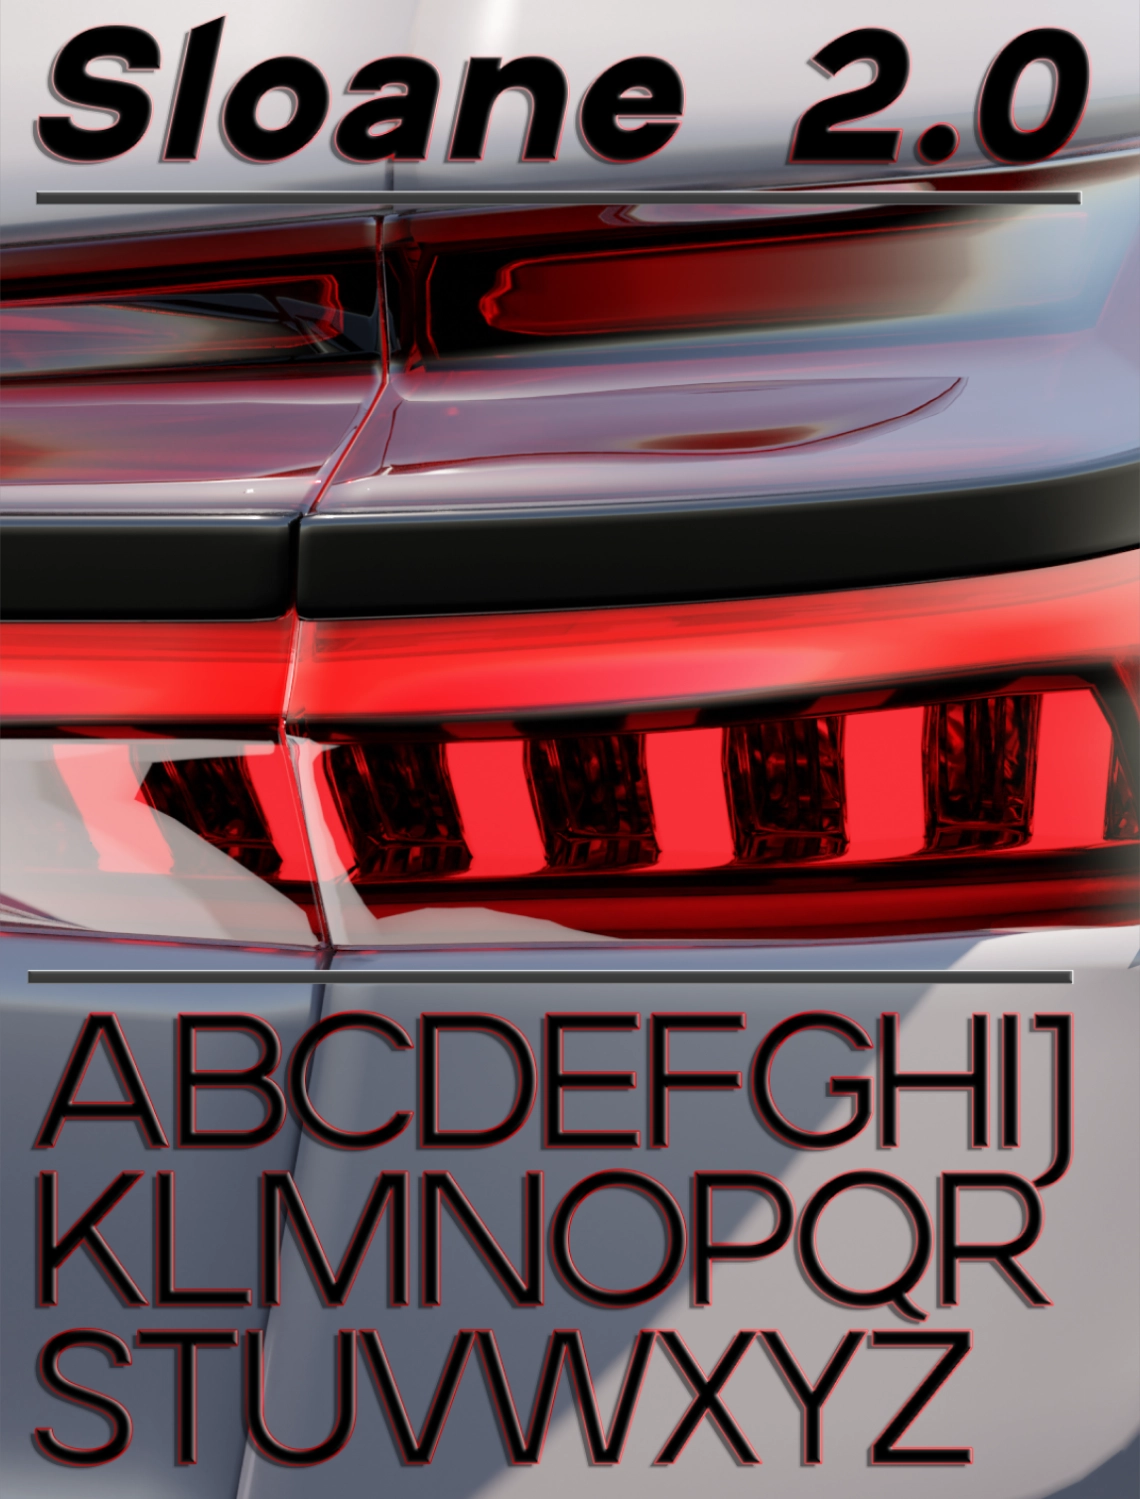 Font showcase with a car render behind